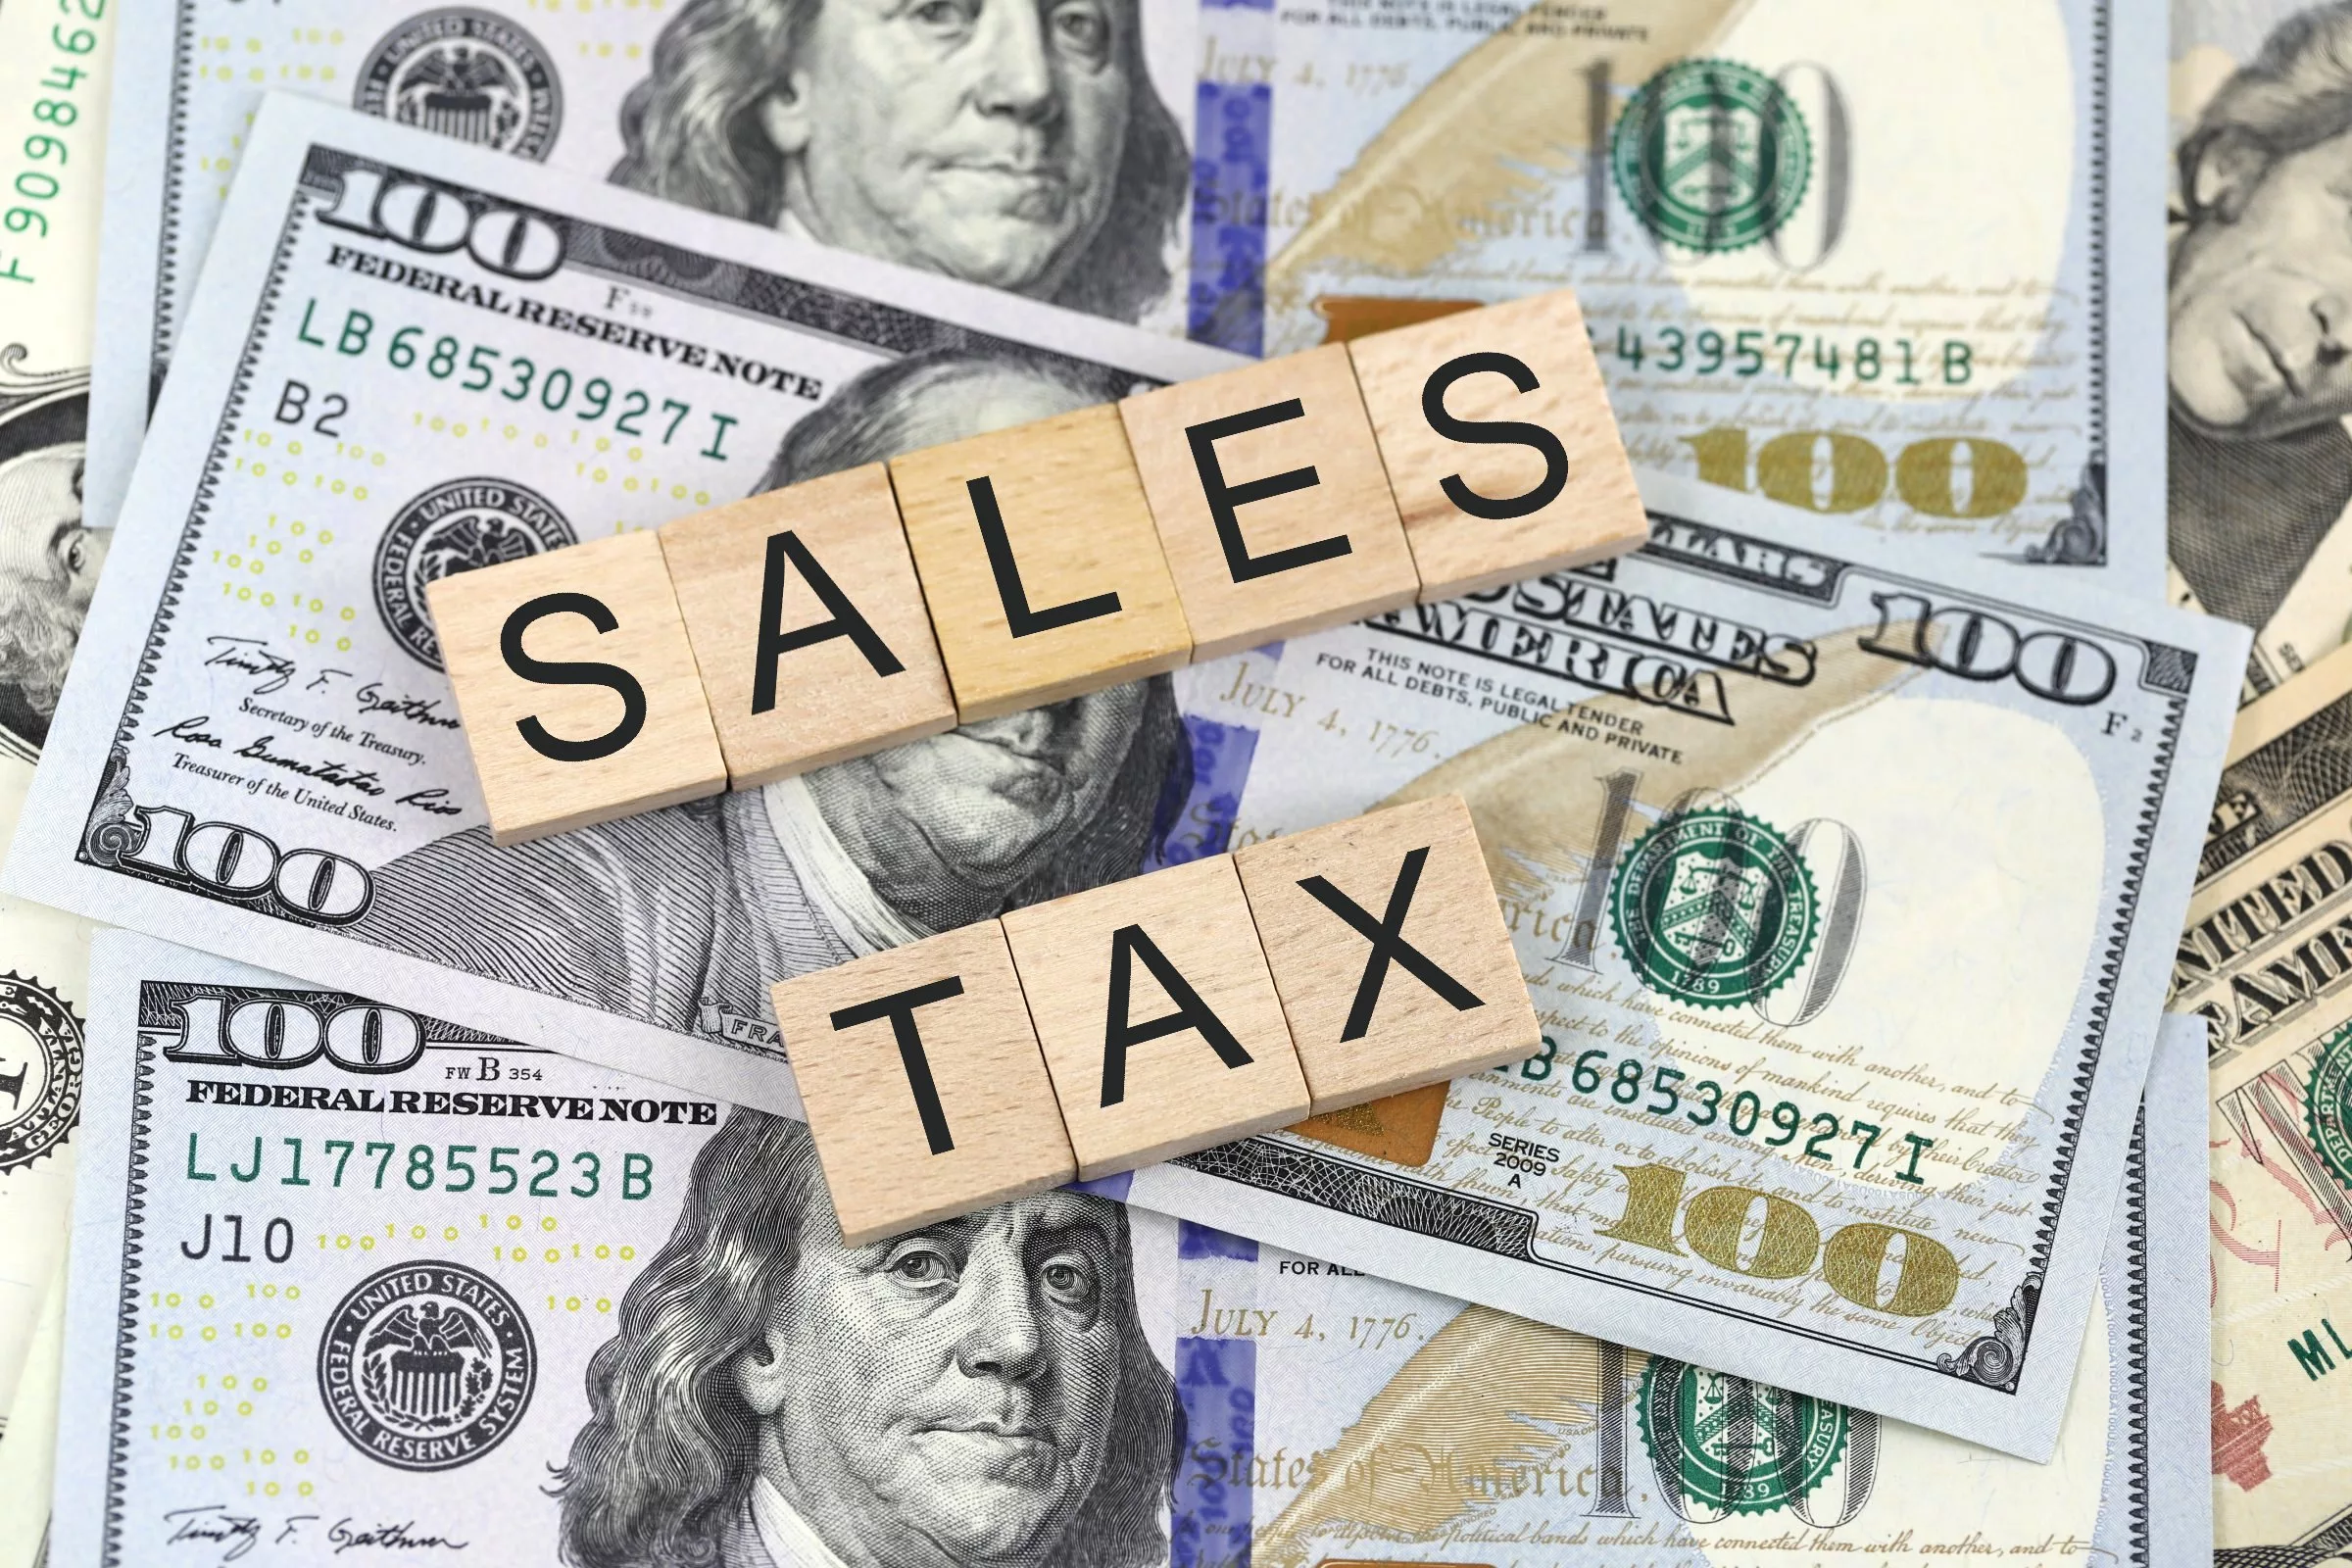 sales tax graphic: credit Creative Commons by Nick Youngson